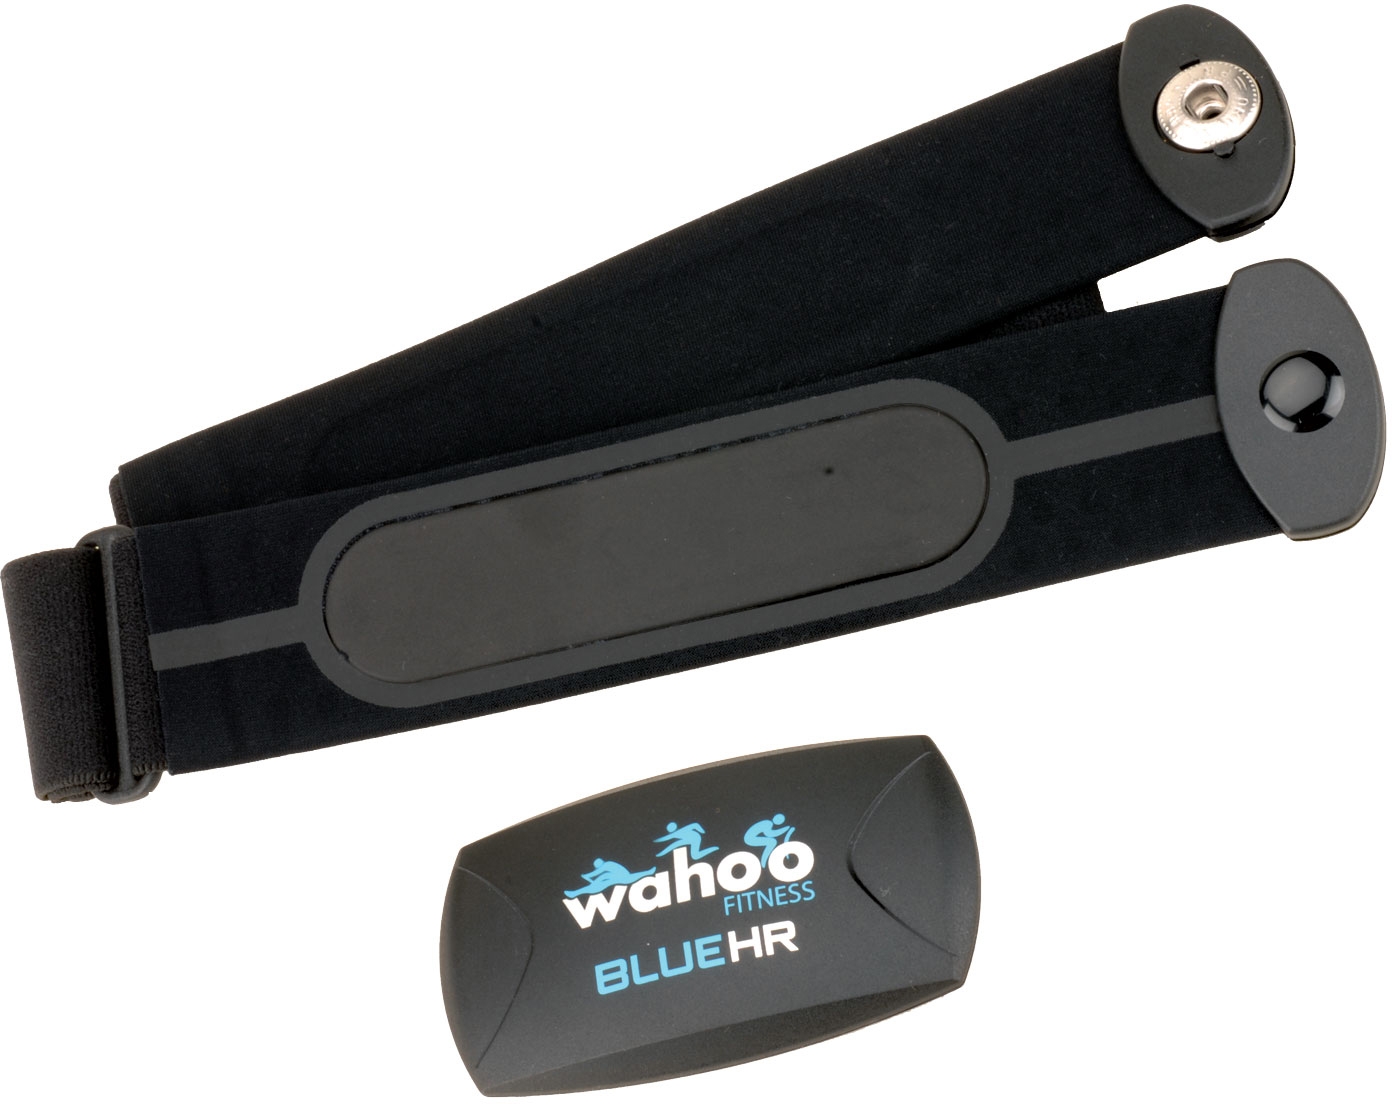 Wahoo BLUEHR Heart Rate Strap iPhone 